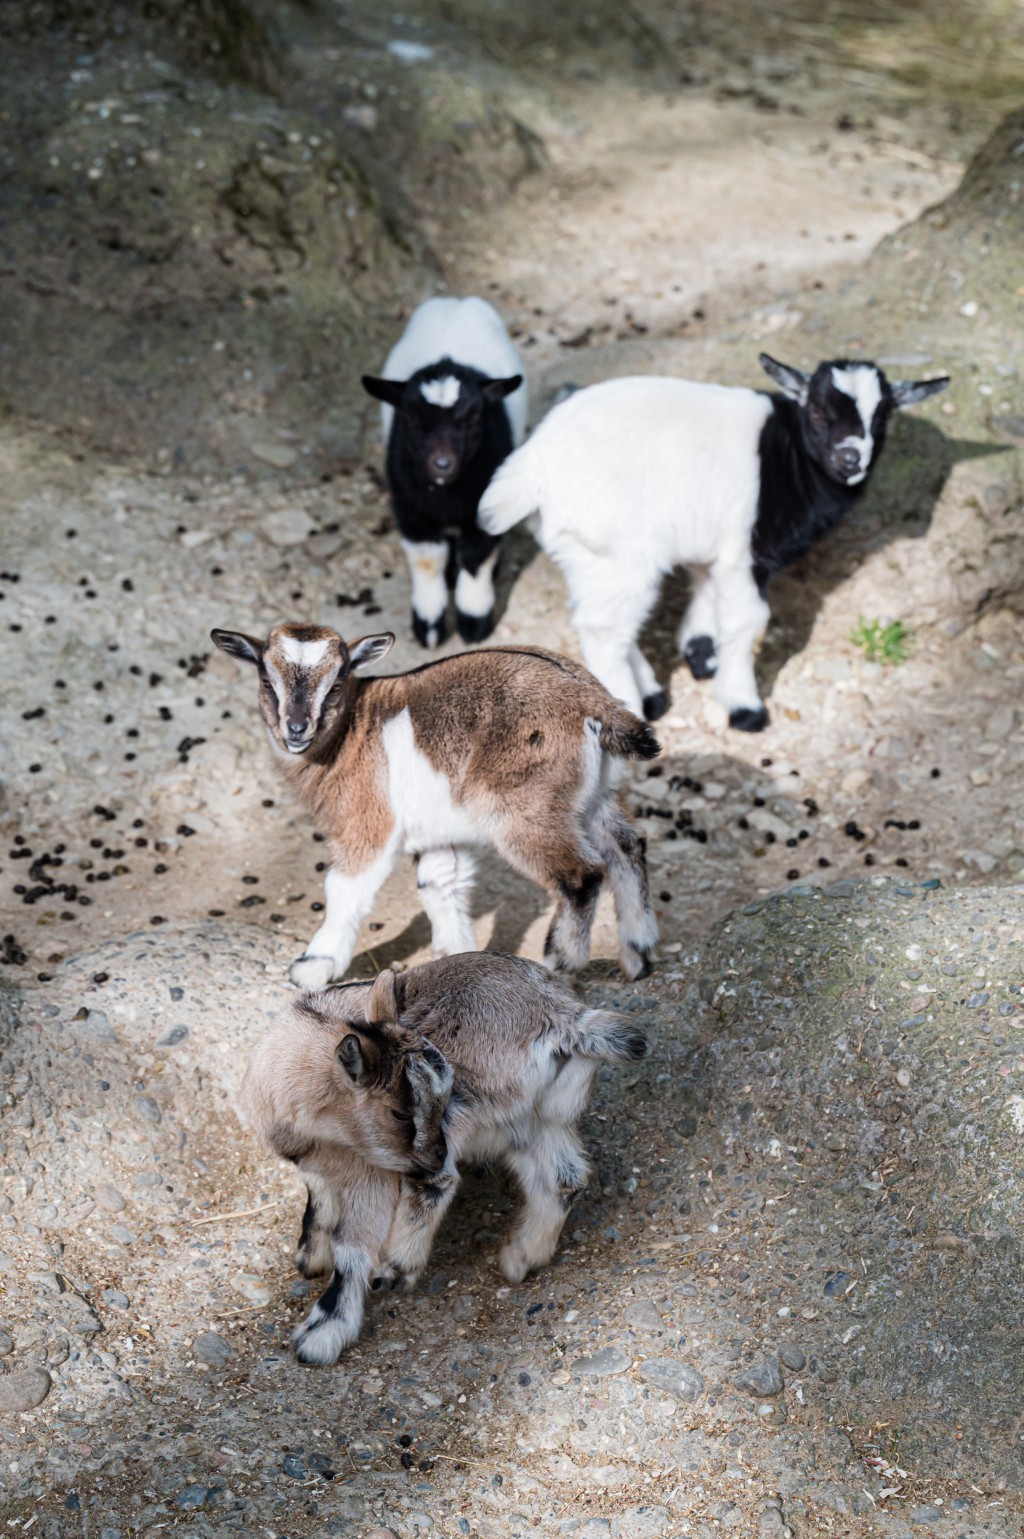 Bleating times thirteen: new arrivals for the pygmy goats